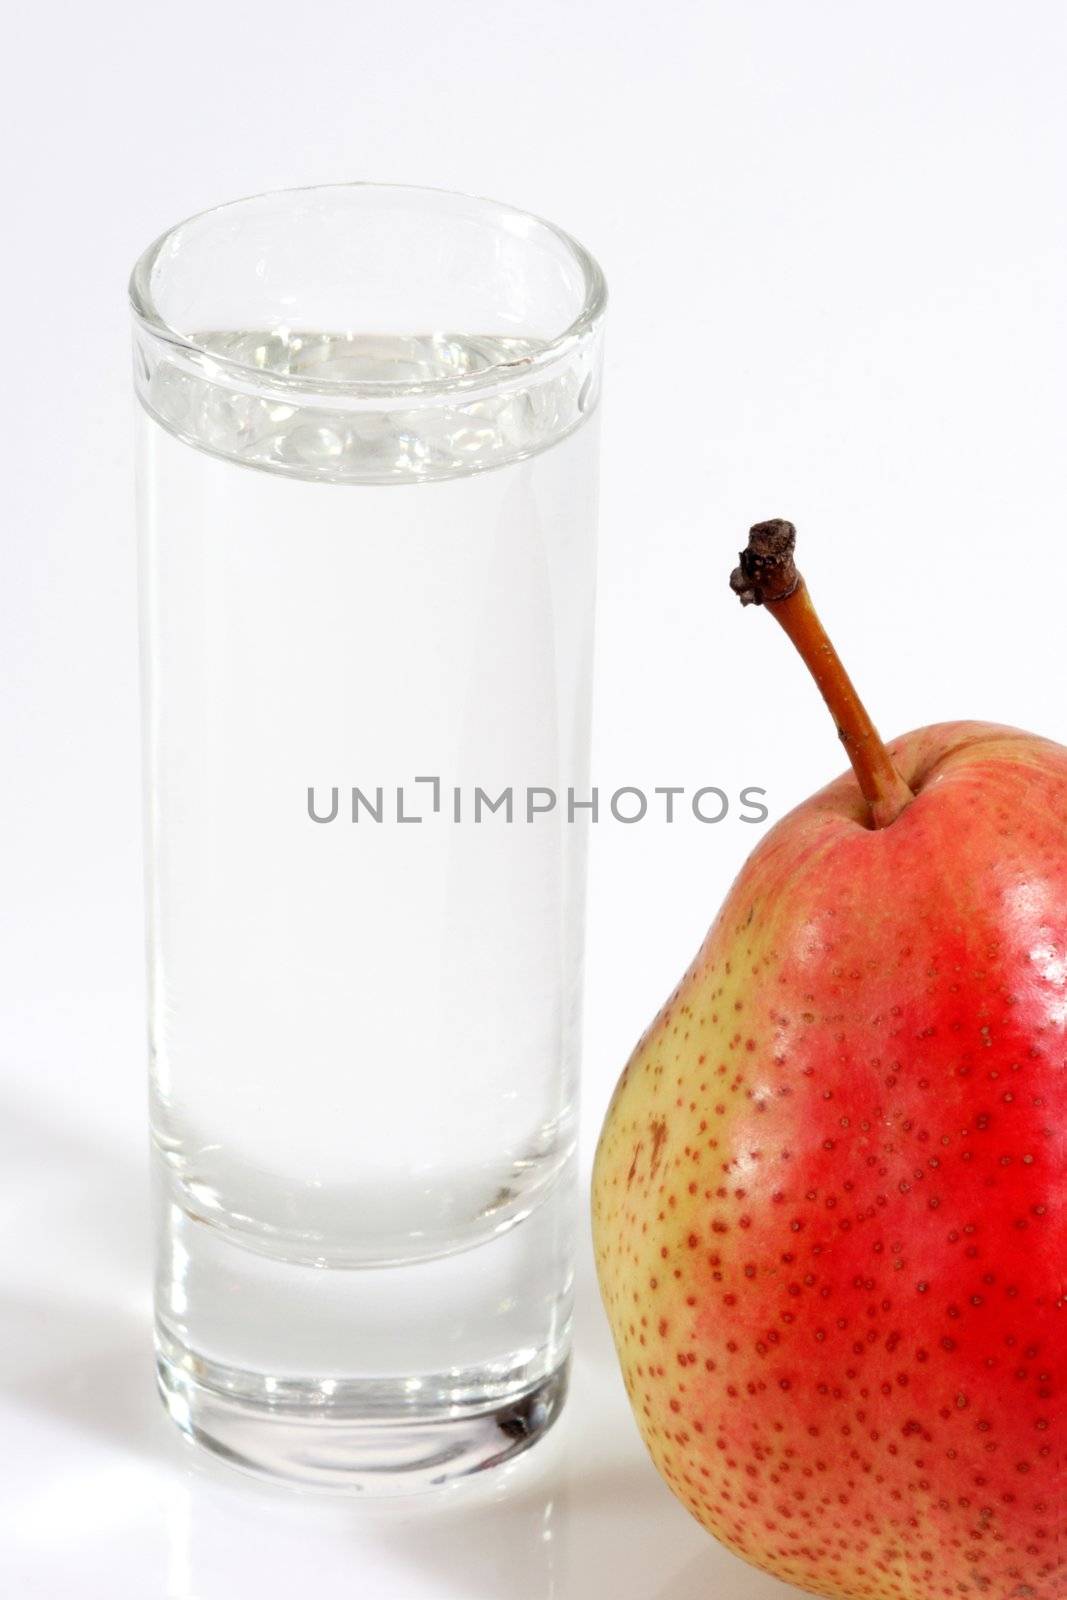 Glass of pear brandy on the bright background